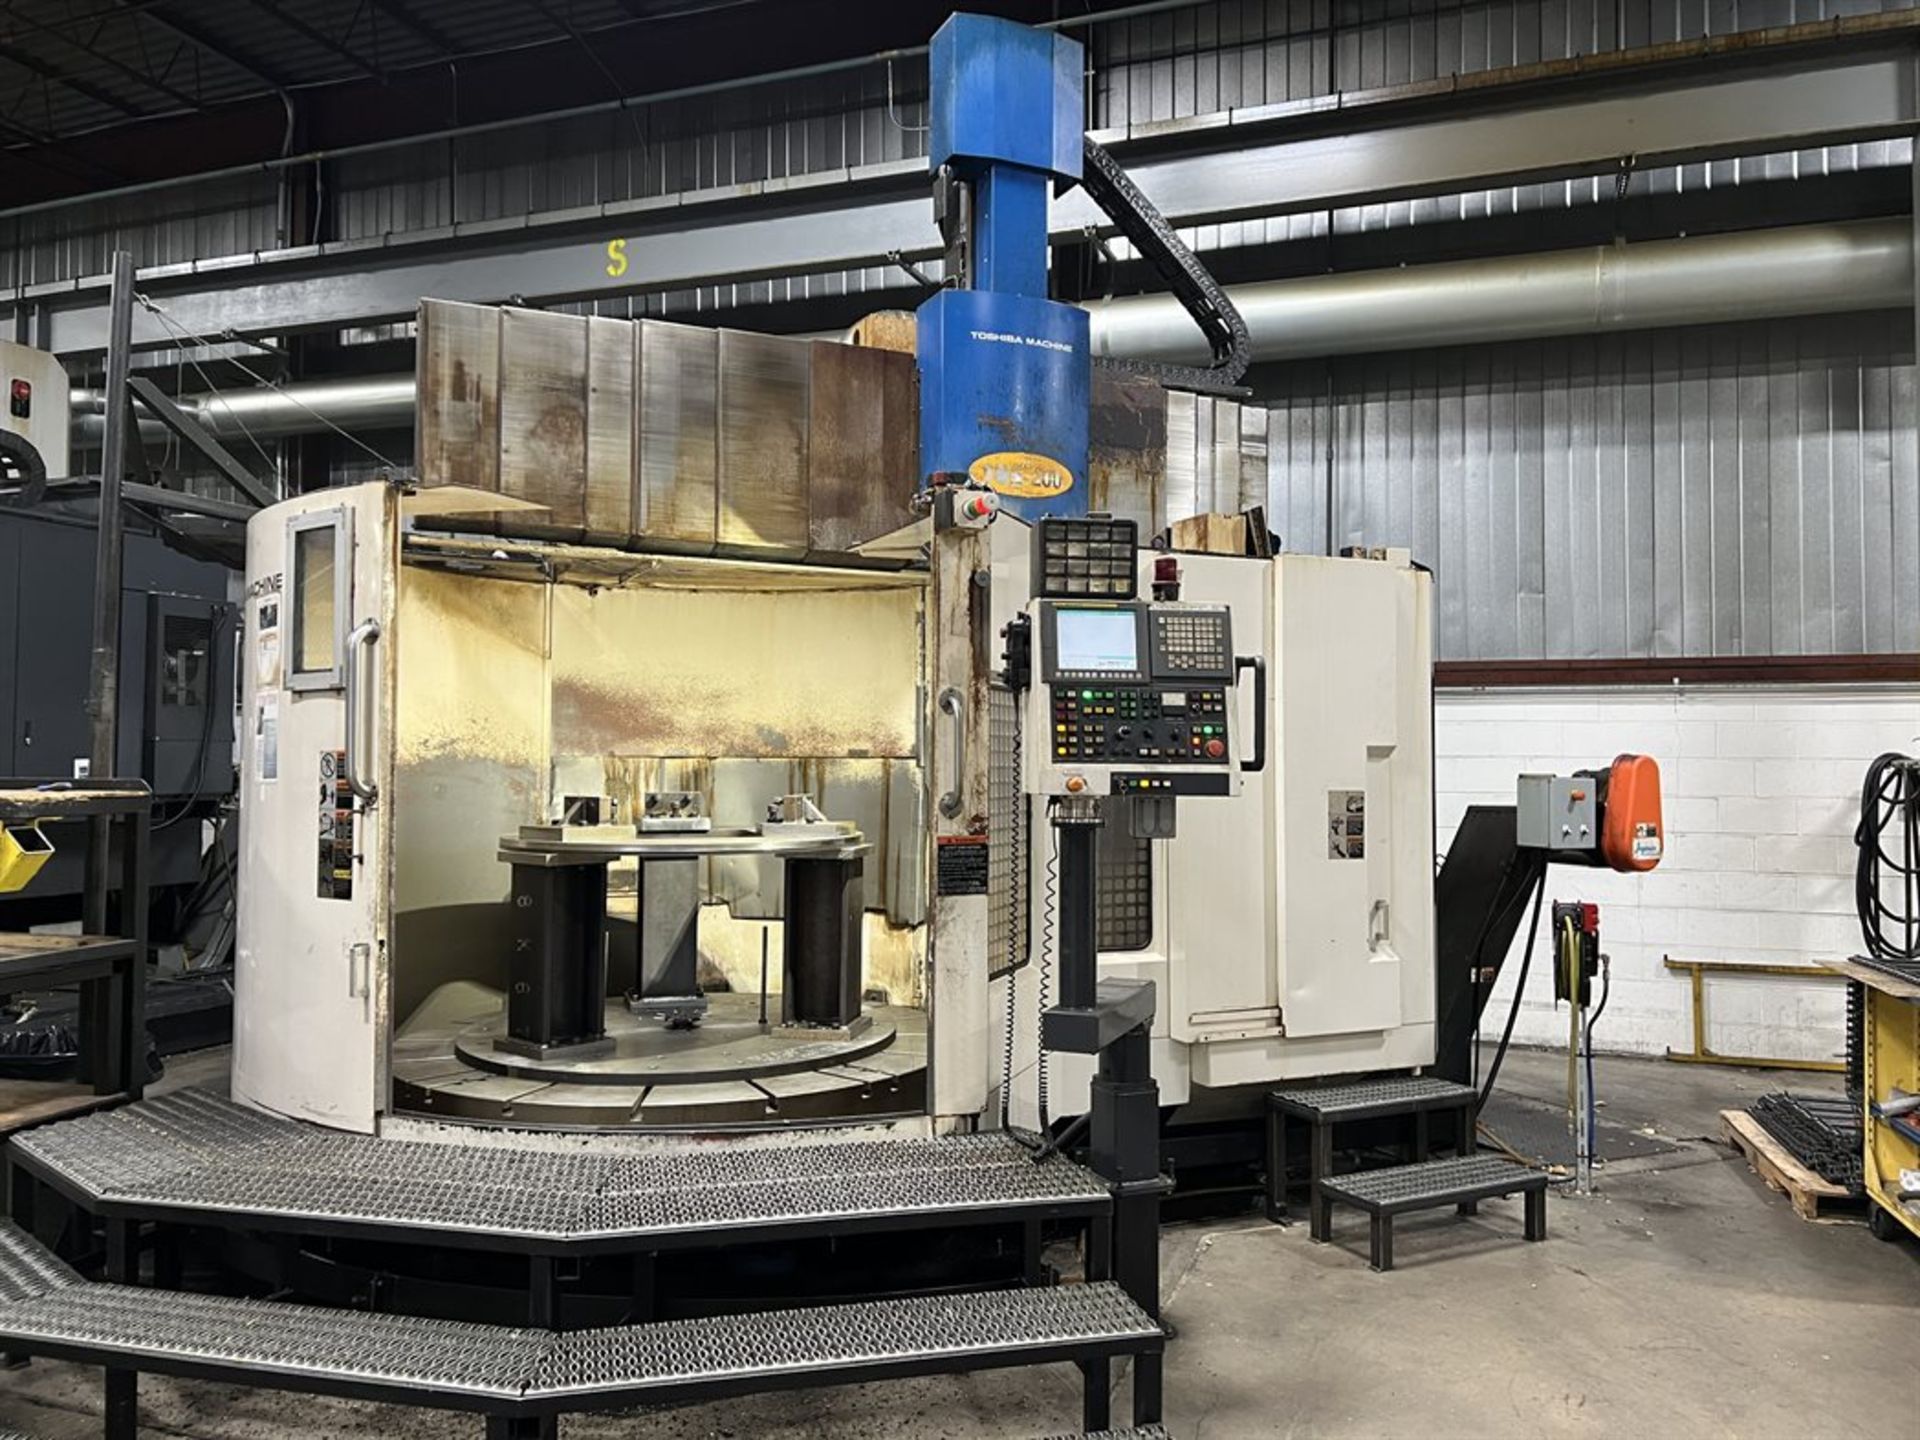 2011 TOSHIBA TUE-200 3-Axis CNC Vertical Turning Center, s/n 440548, Fanuc Series 0i-TD Controls, - Image 2 of 16